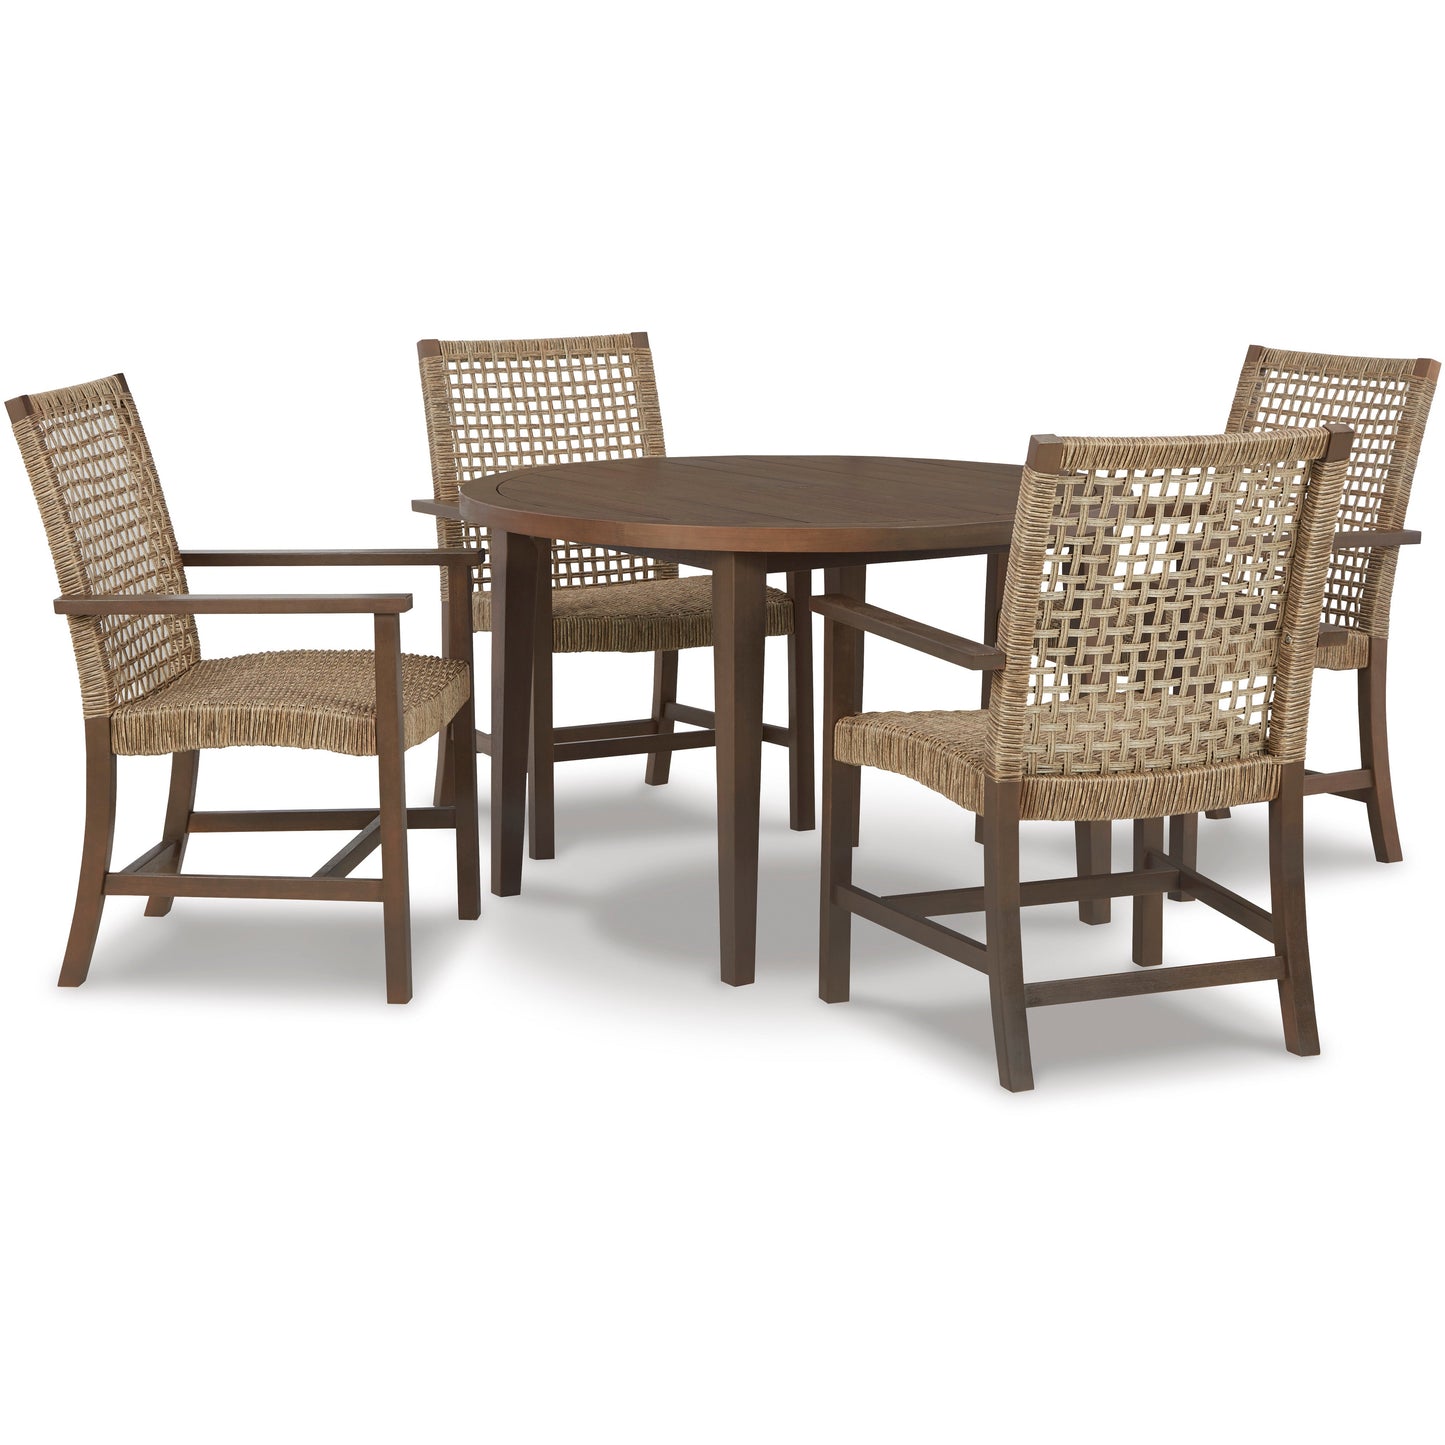 GERMALIA OUTDOOR DINING TABLE & 4 CHAIRS